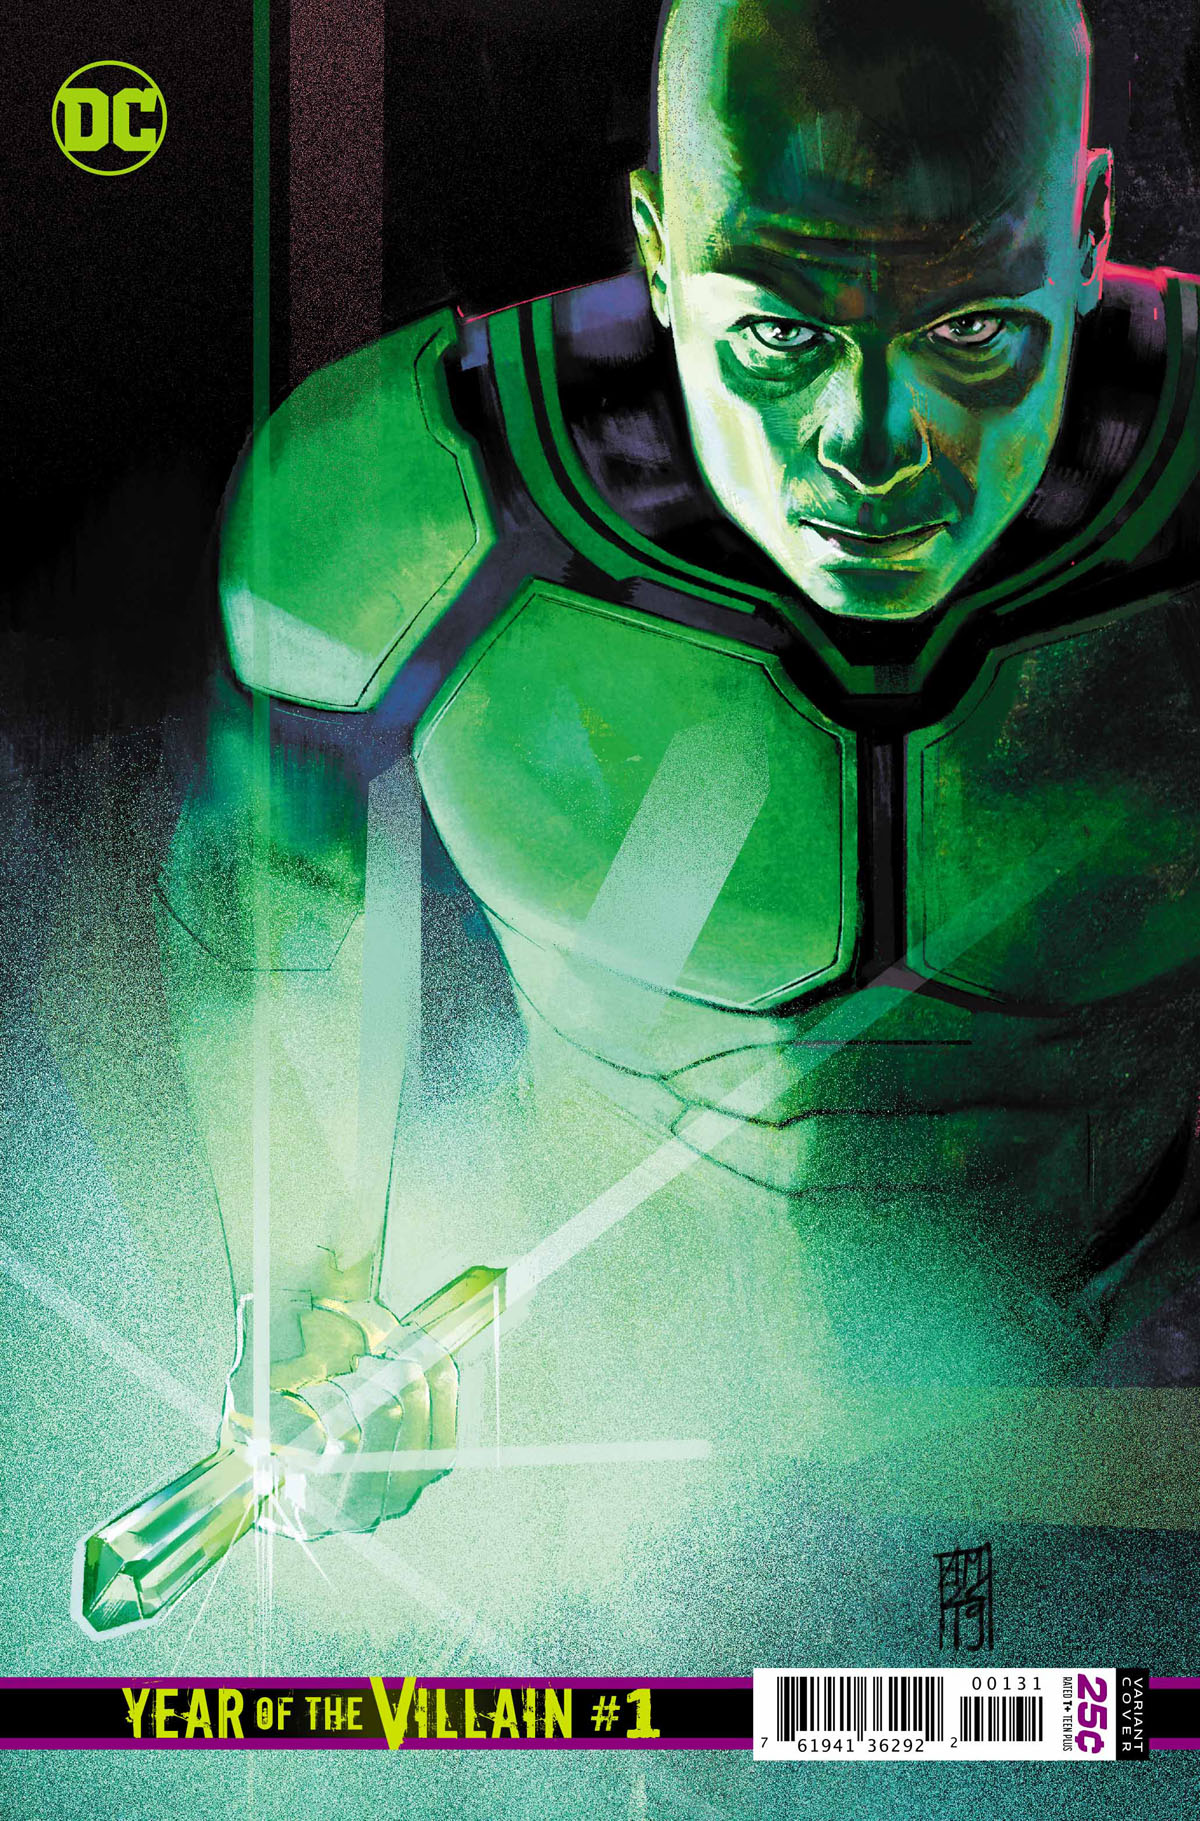 DC's Year of the Villain #1 Lex Luthor variant cover